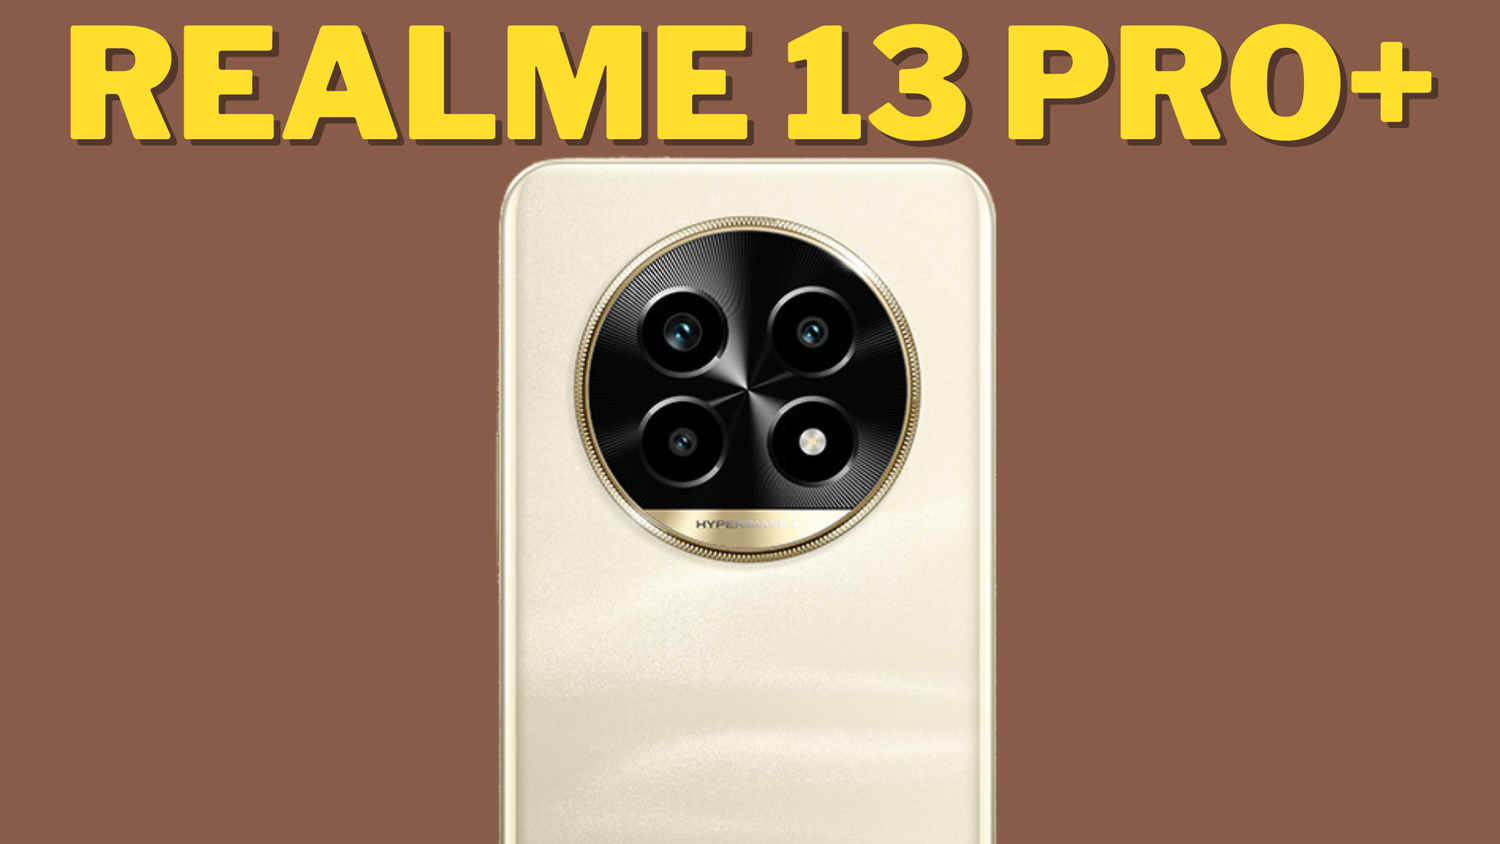 Realme 13 Pro+ launch next week: Expected price, features, and everything else we know